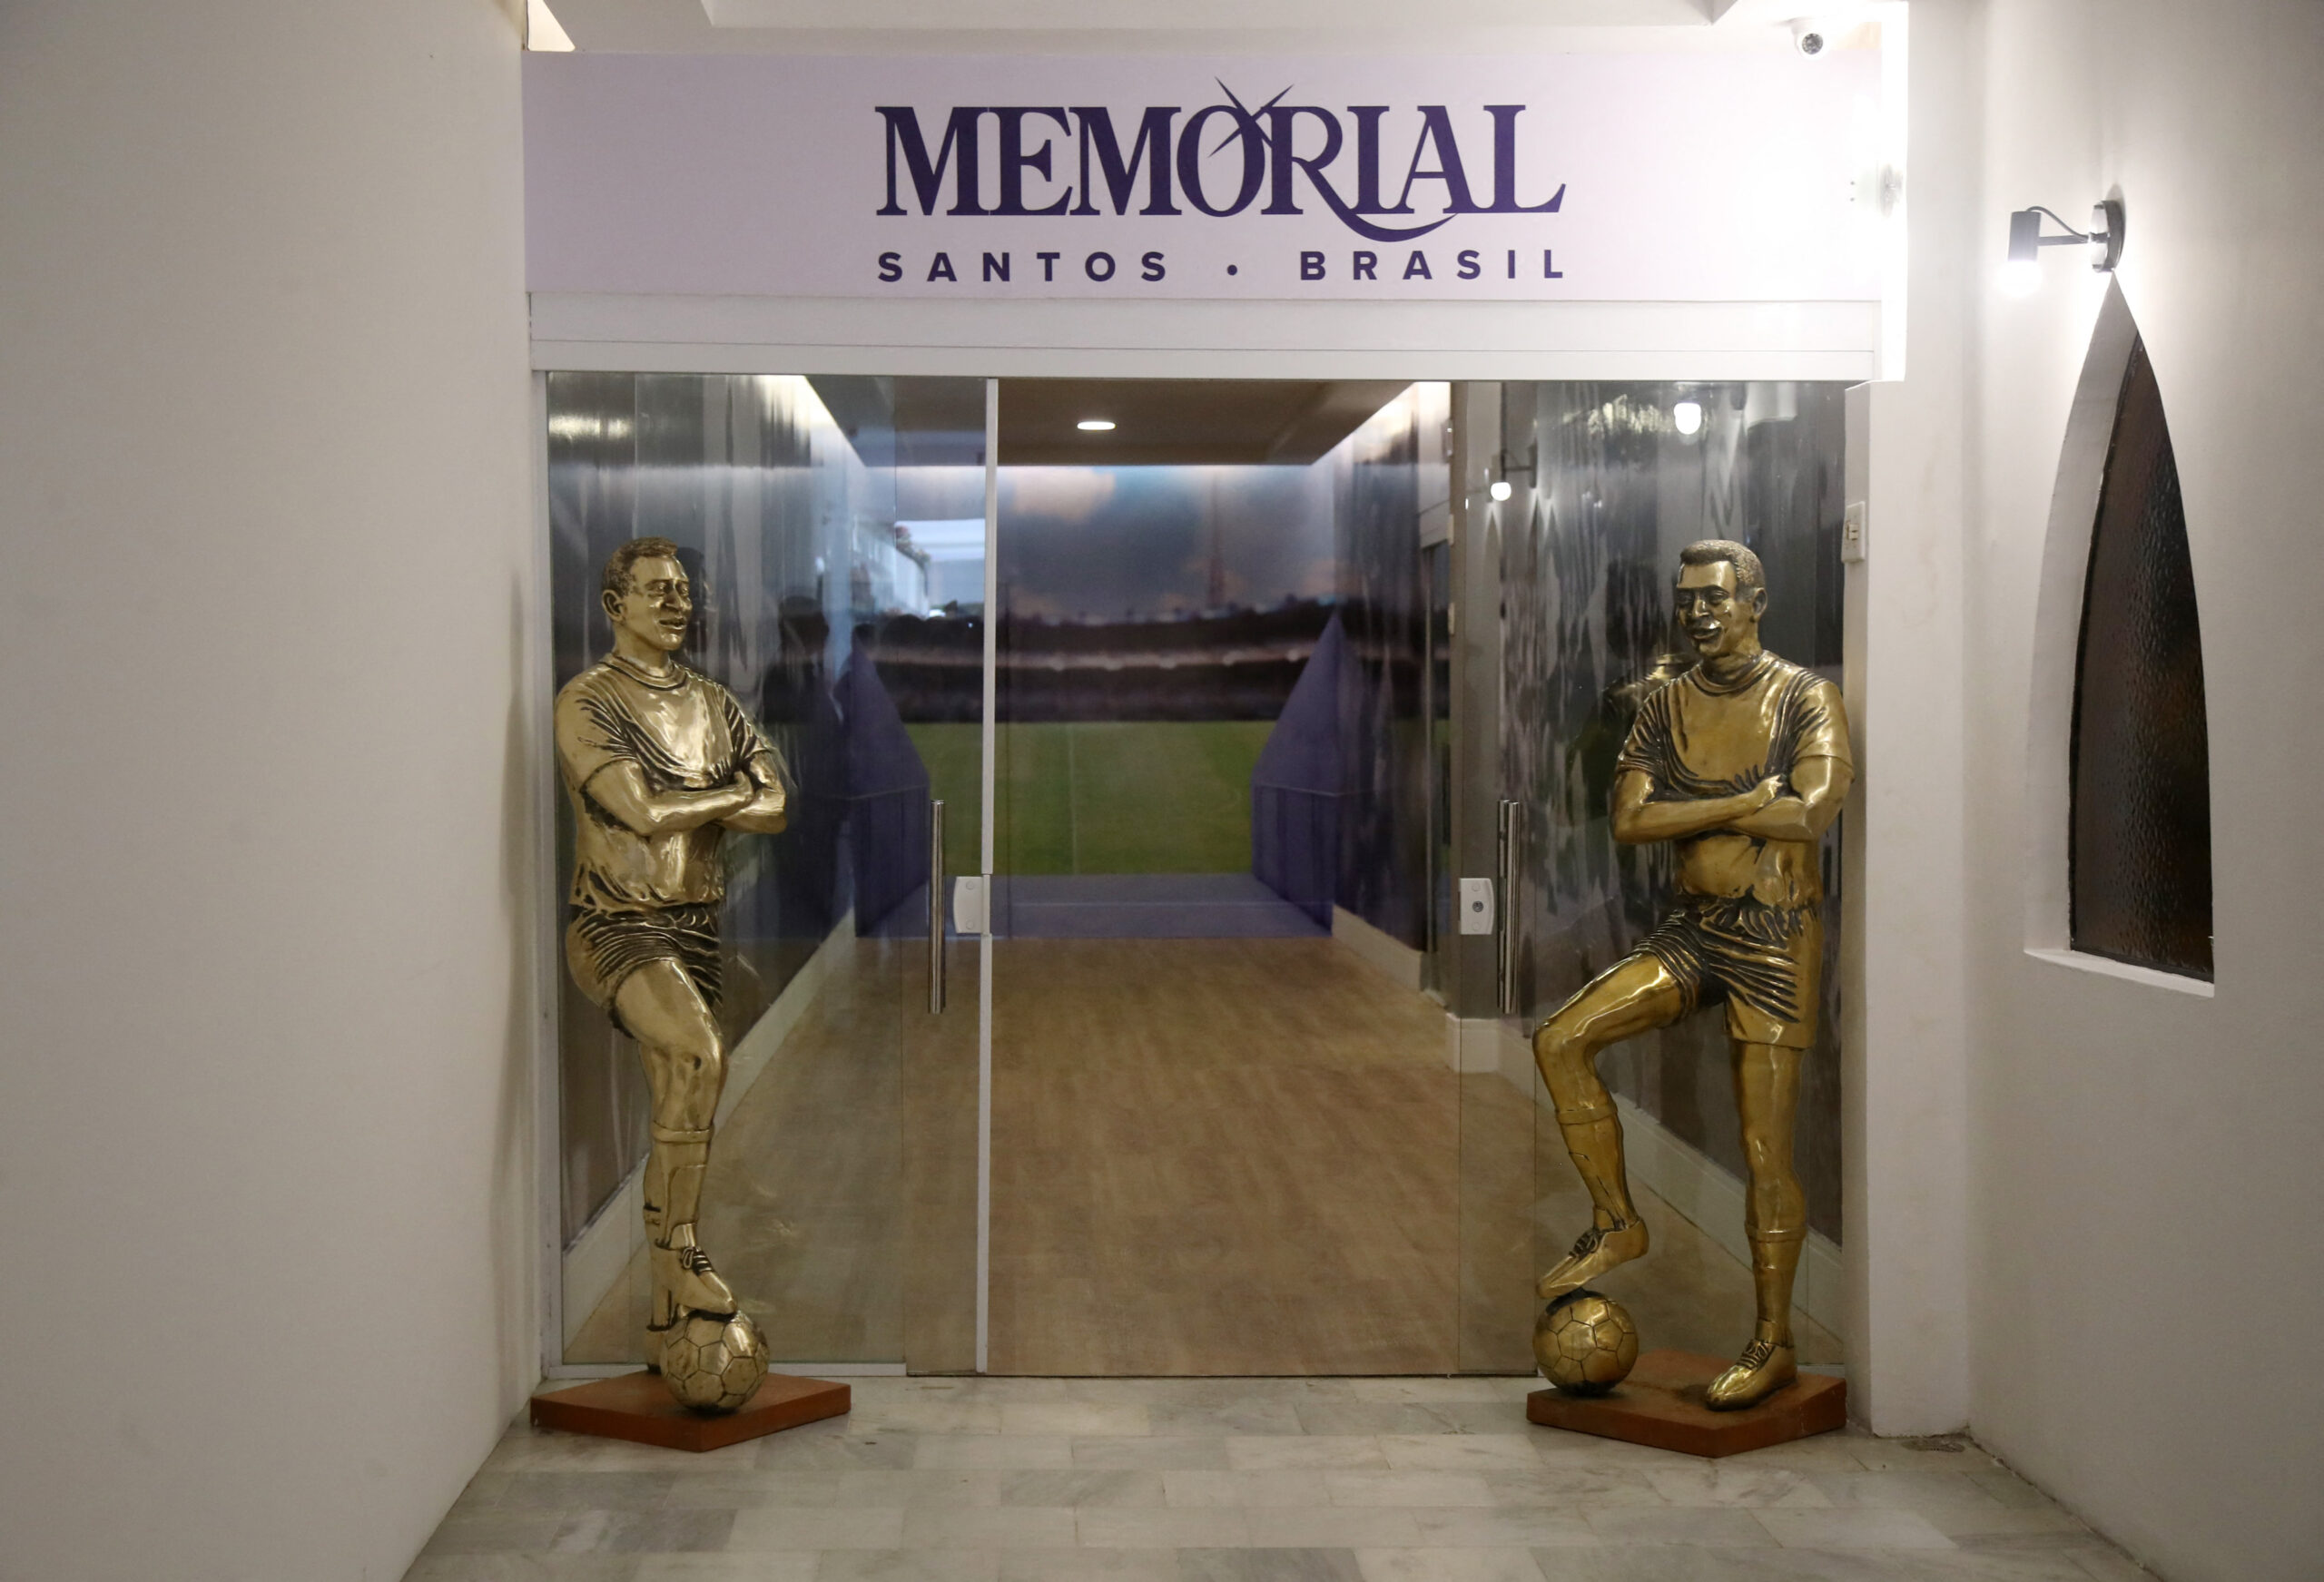 The memorial dedicated to Pele is a luxurious mausoleum